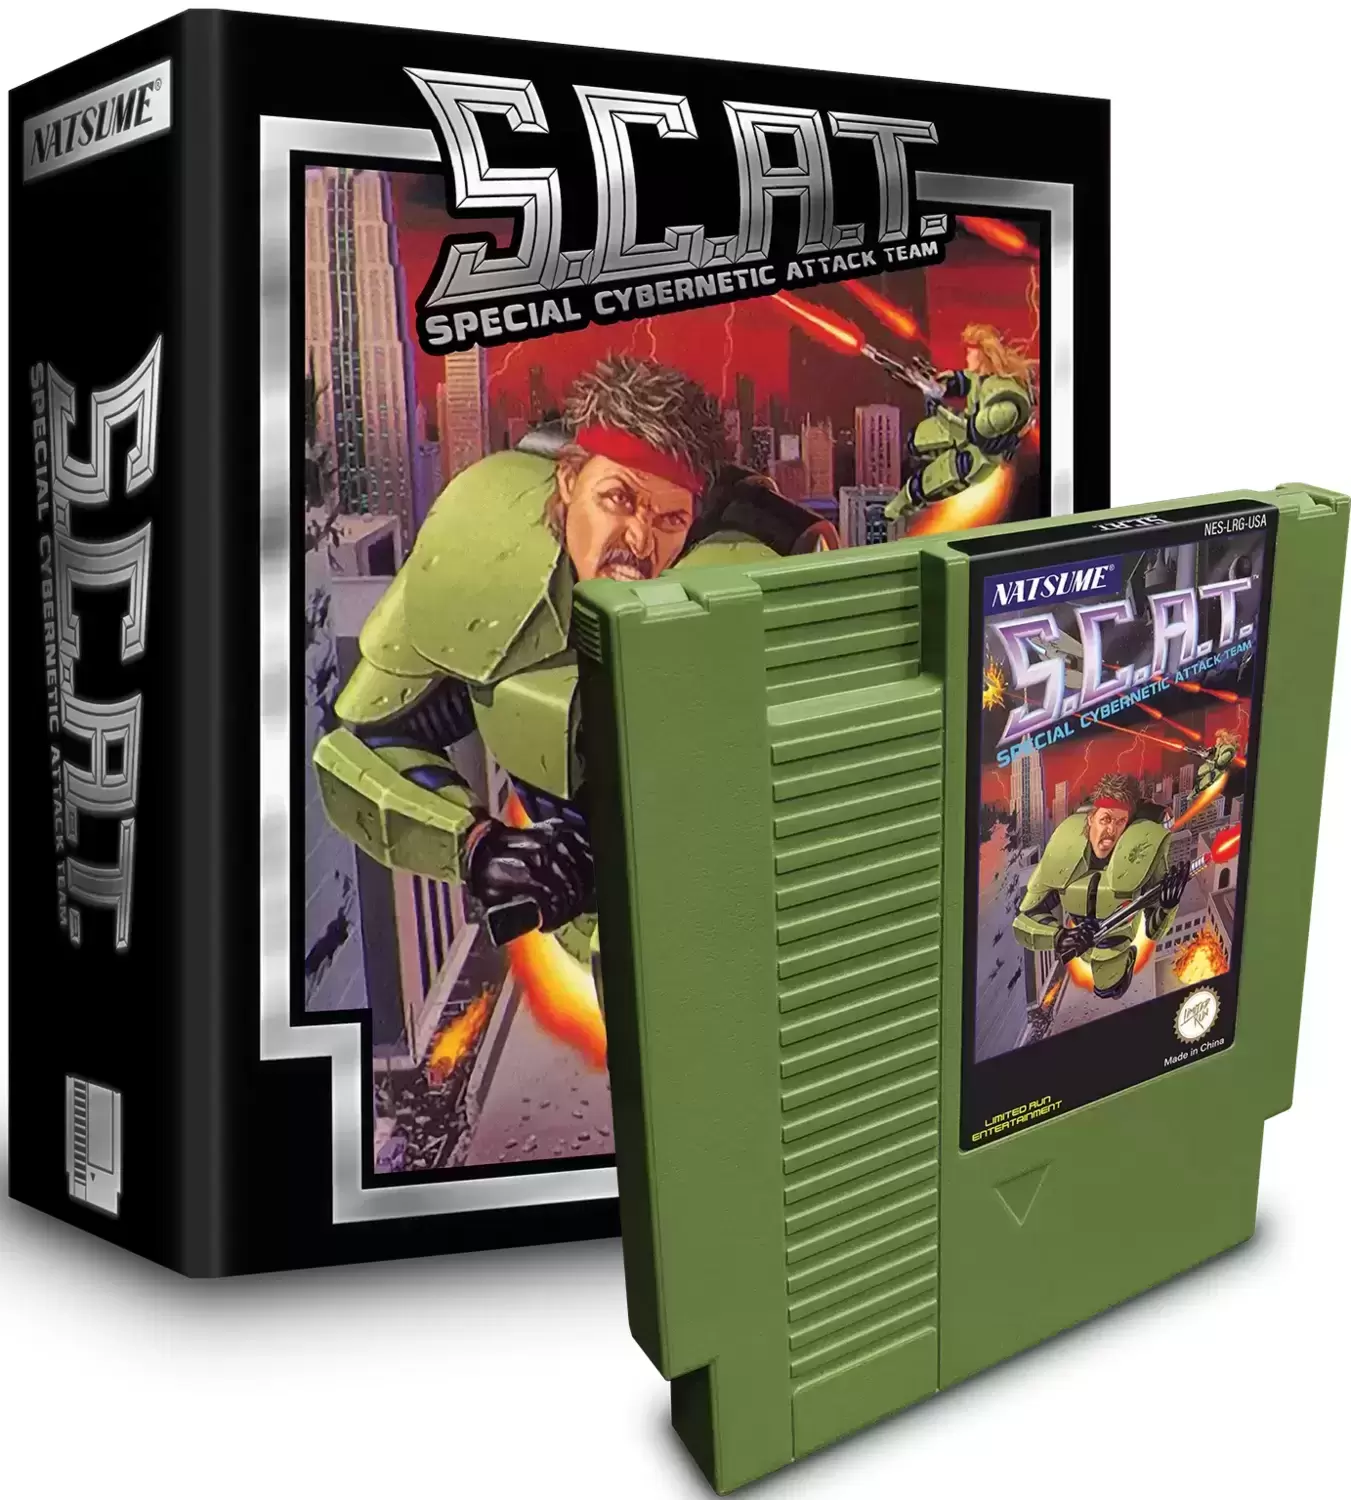 Jeux Nintendo NES - S.C.A.T.: Special Cybernetic Attack Team Collector’s Edition - Green - Limited Run Games - NES